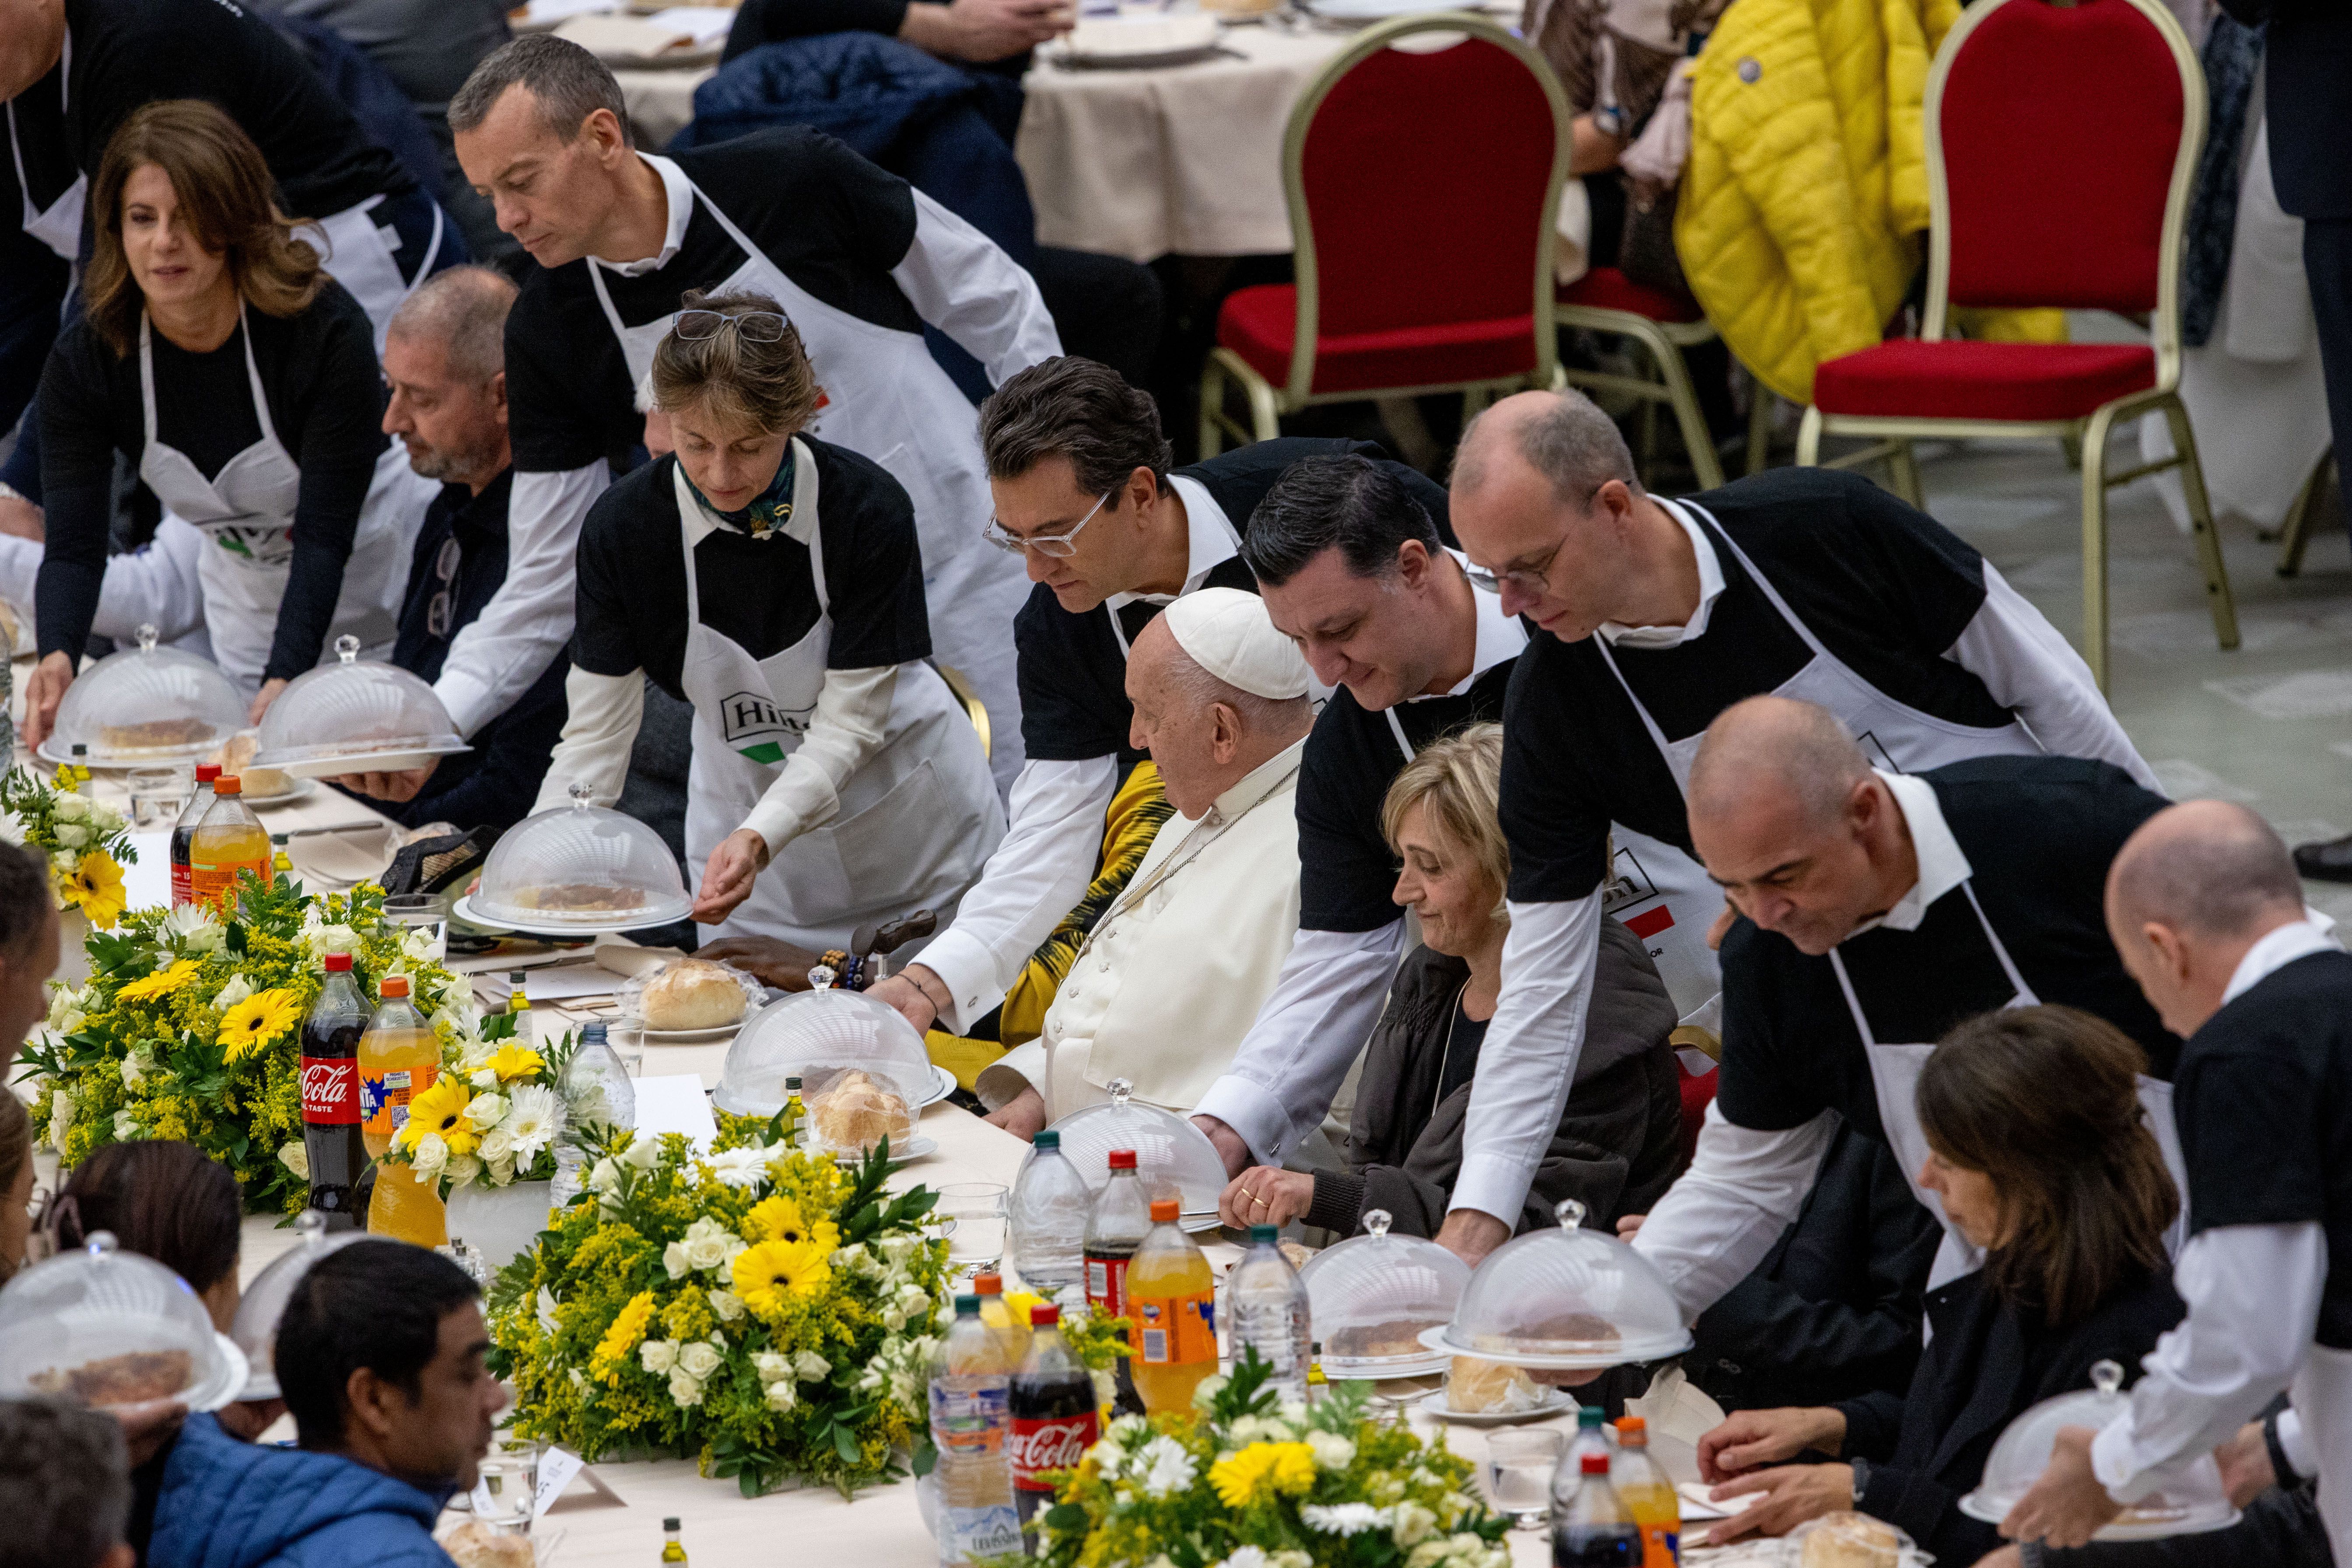 PHOTOS: Pope Francis shares Vatican lunch with poor – es